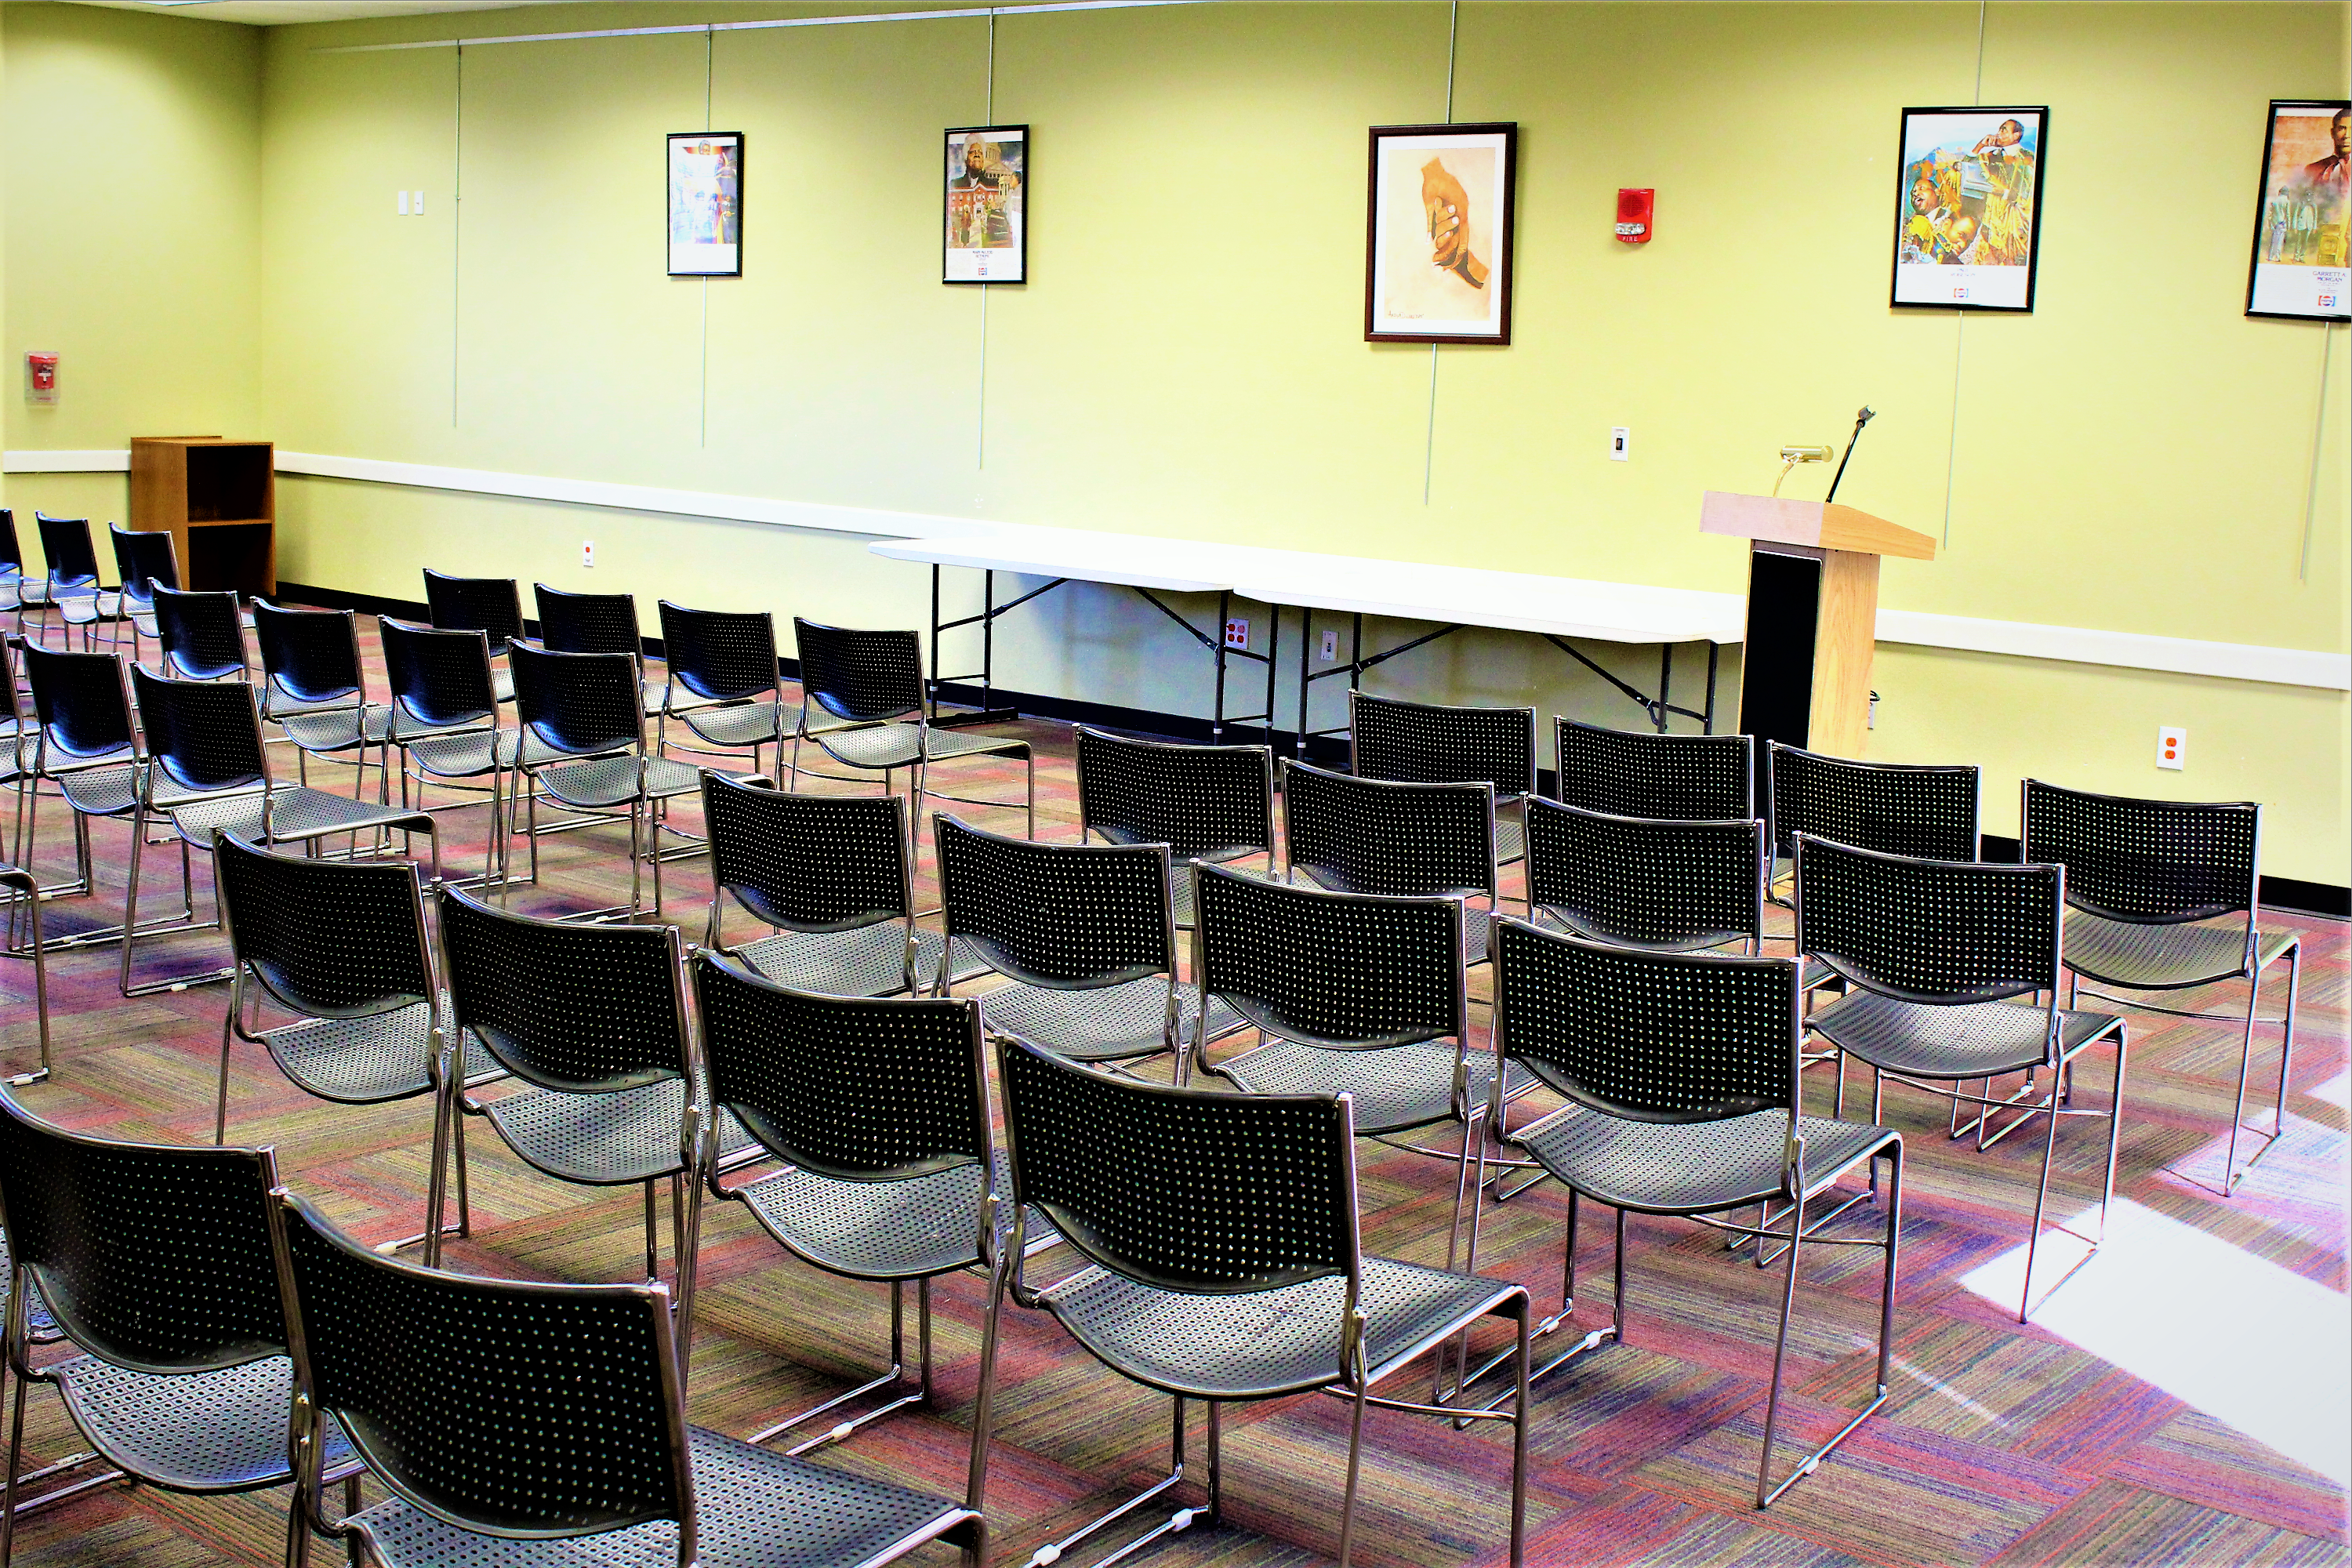 Photo of the Meeting Room in which the Adventure Workshop will be held.